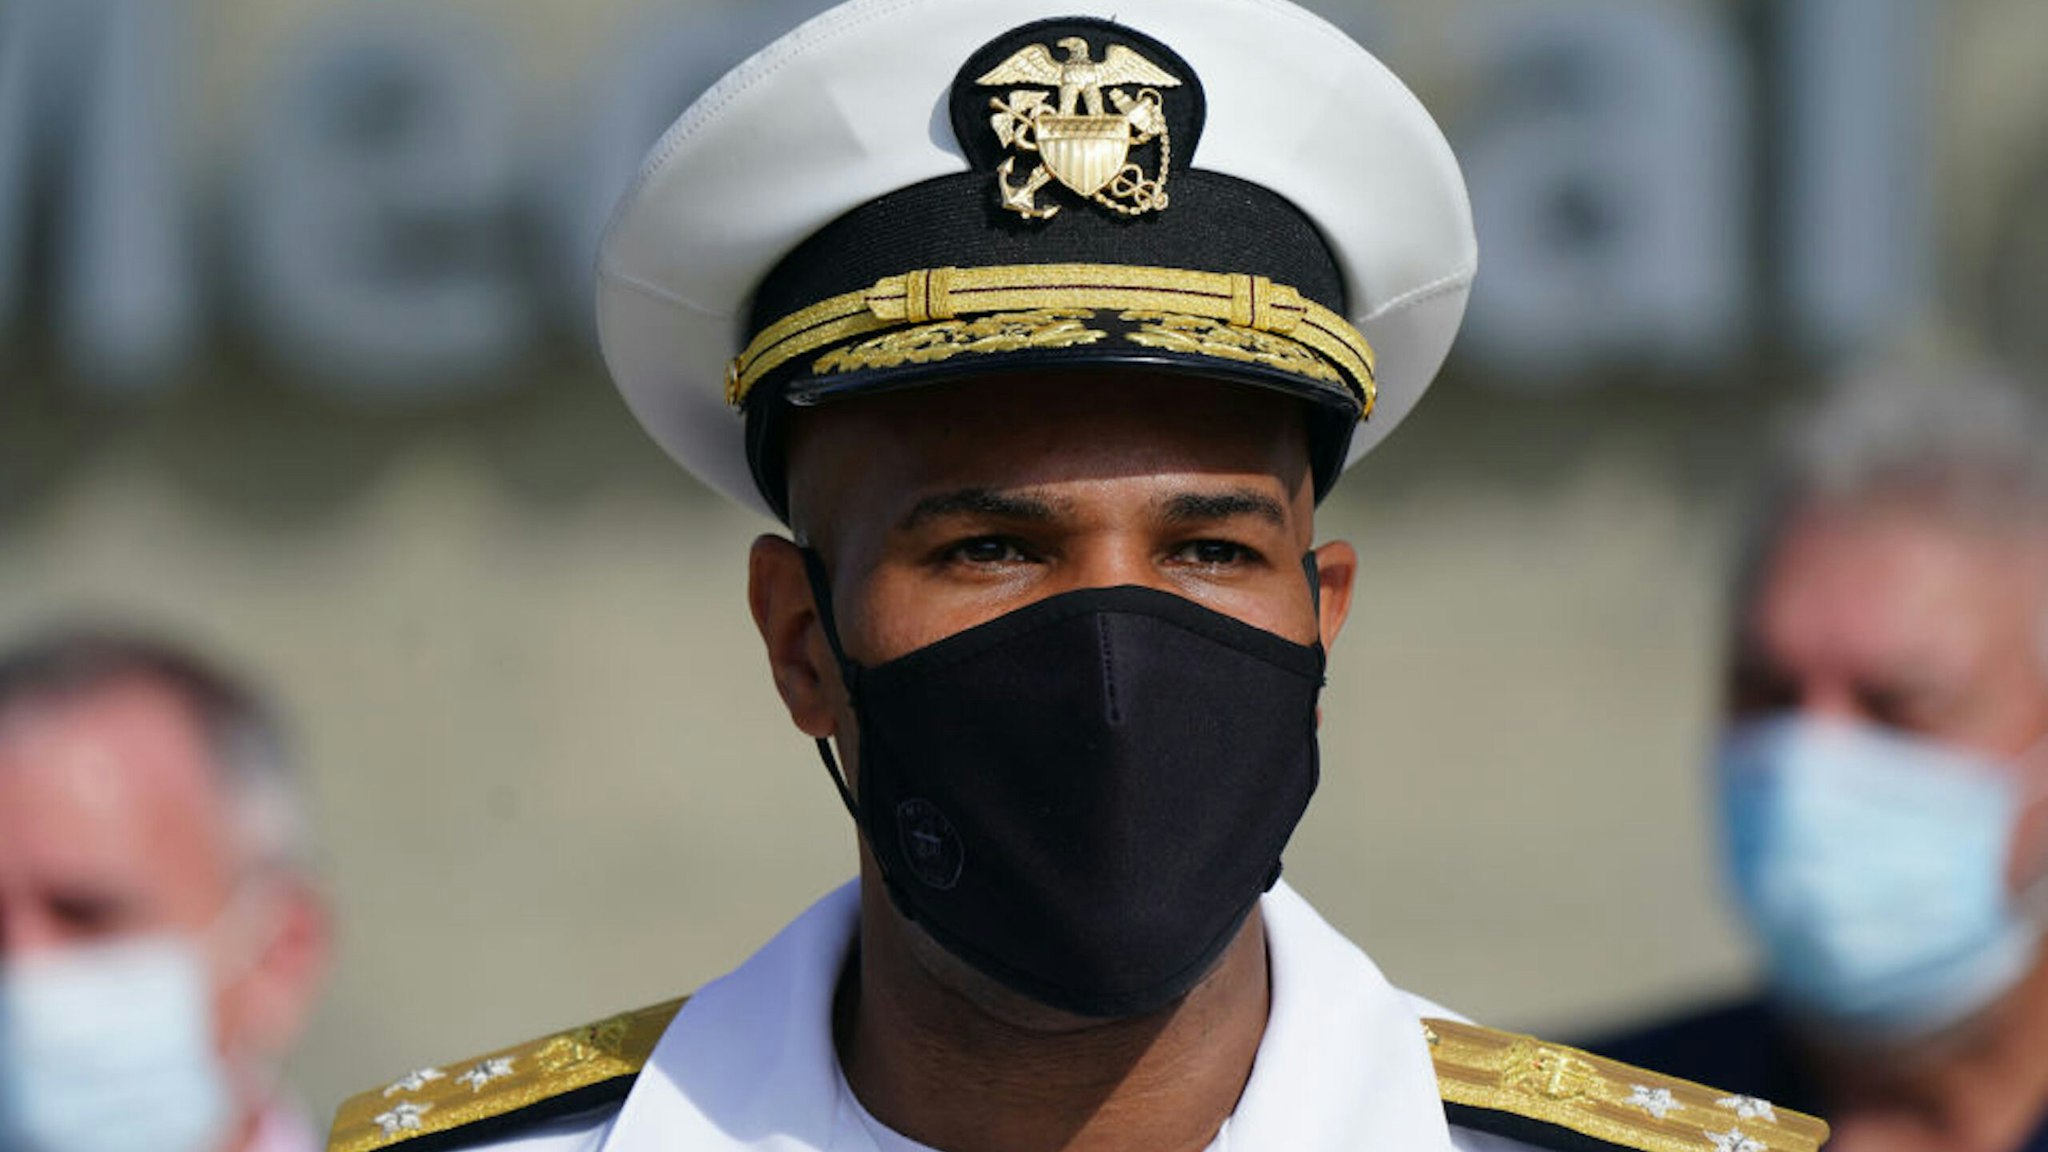 Vice Admiral Jerome Adams, U.S. Surgeon General, wears a protective mask while speaking during a 'Wear A Mask' tour stop in Dalton, Georgia, U.S., on Thursday, July 2, 2020. Governor Kemp on Wednesday expressed his skepticism about the need for a statewide mask mandate and his reluctance to impose one, calling it an issue he feels is "overpoliticized."